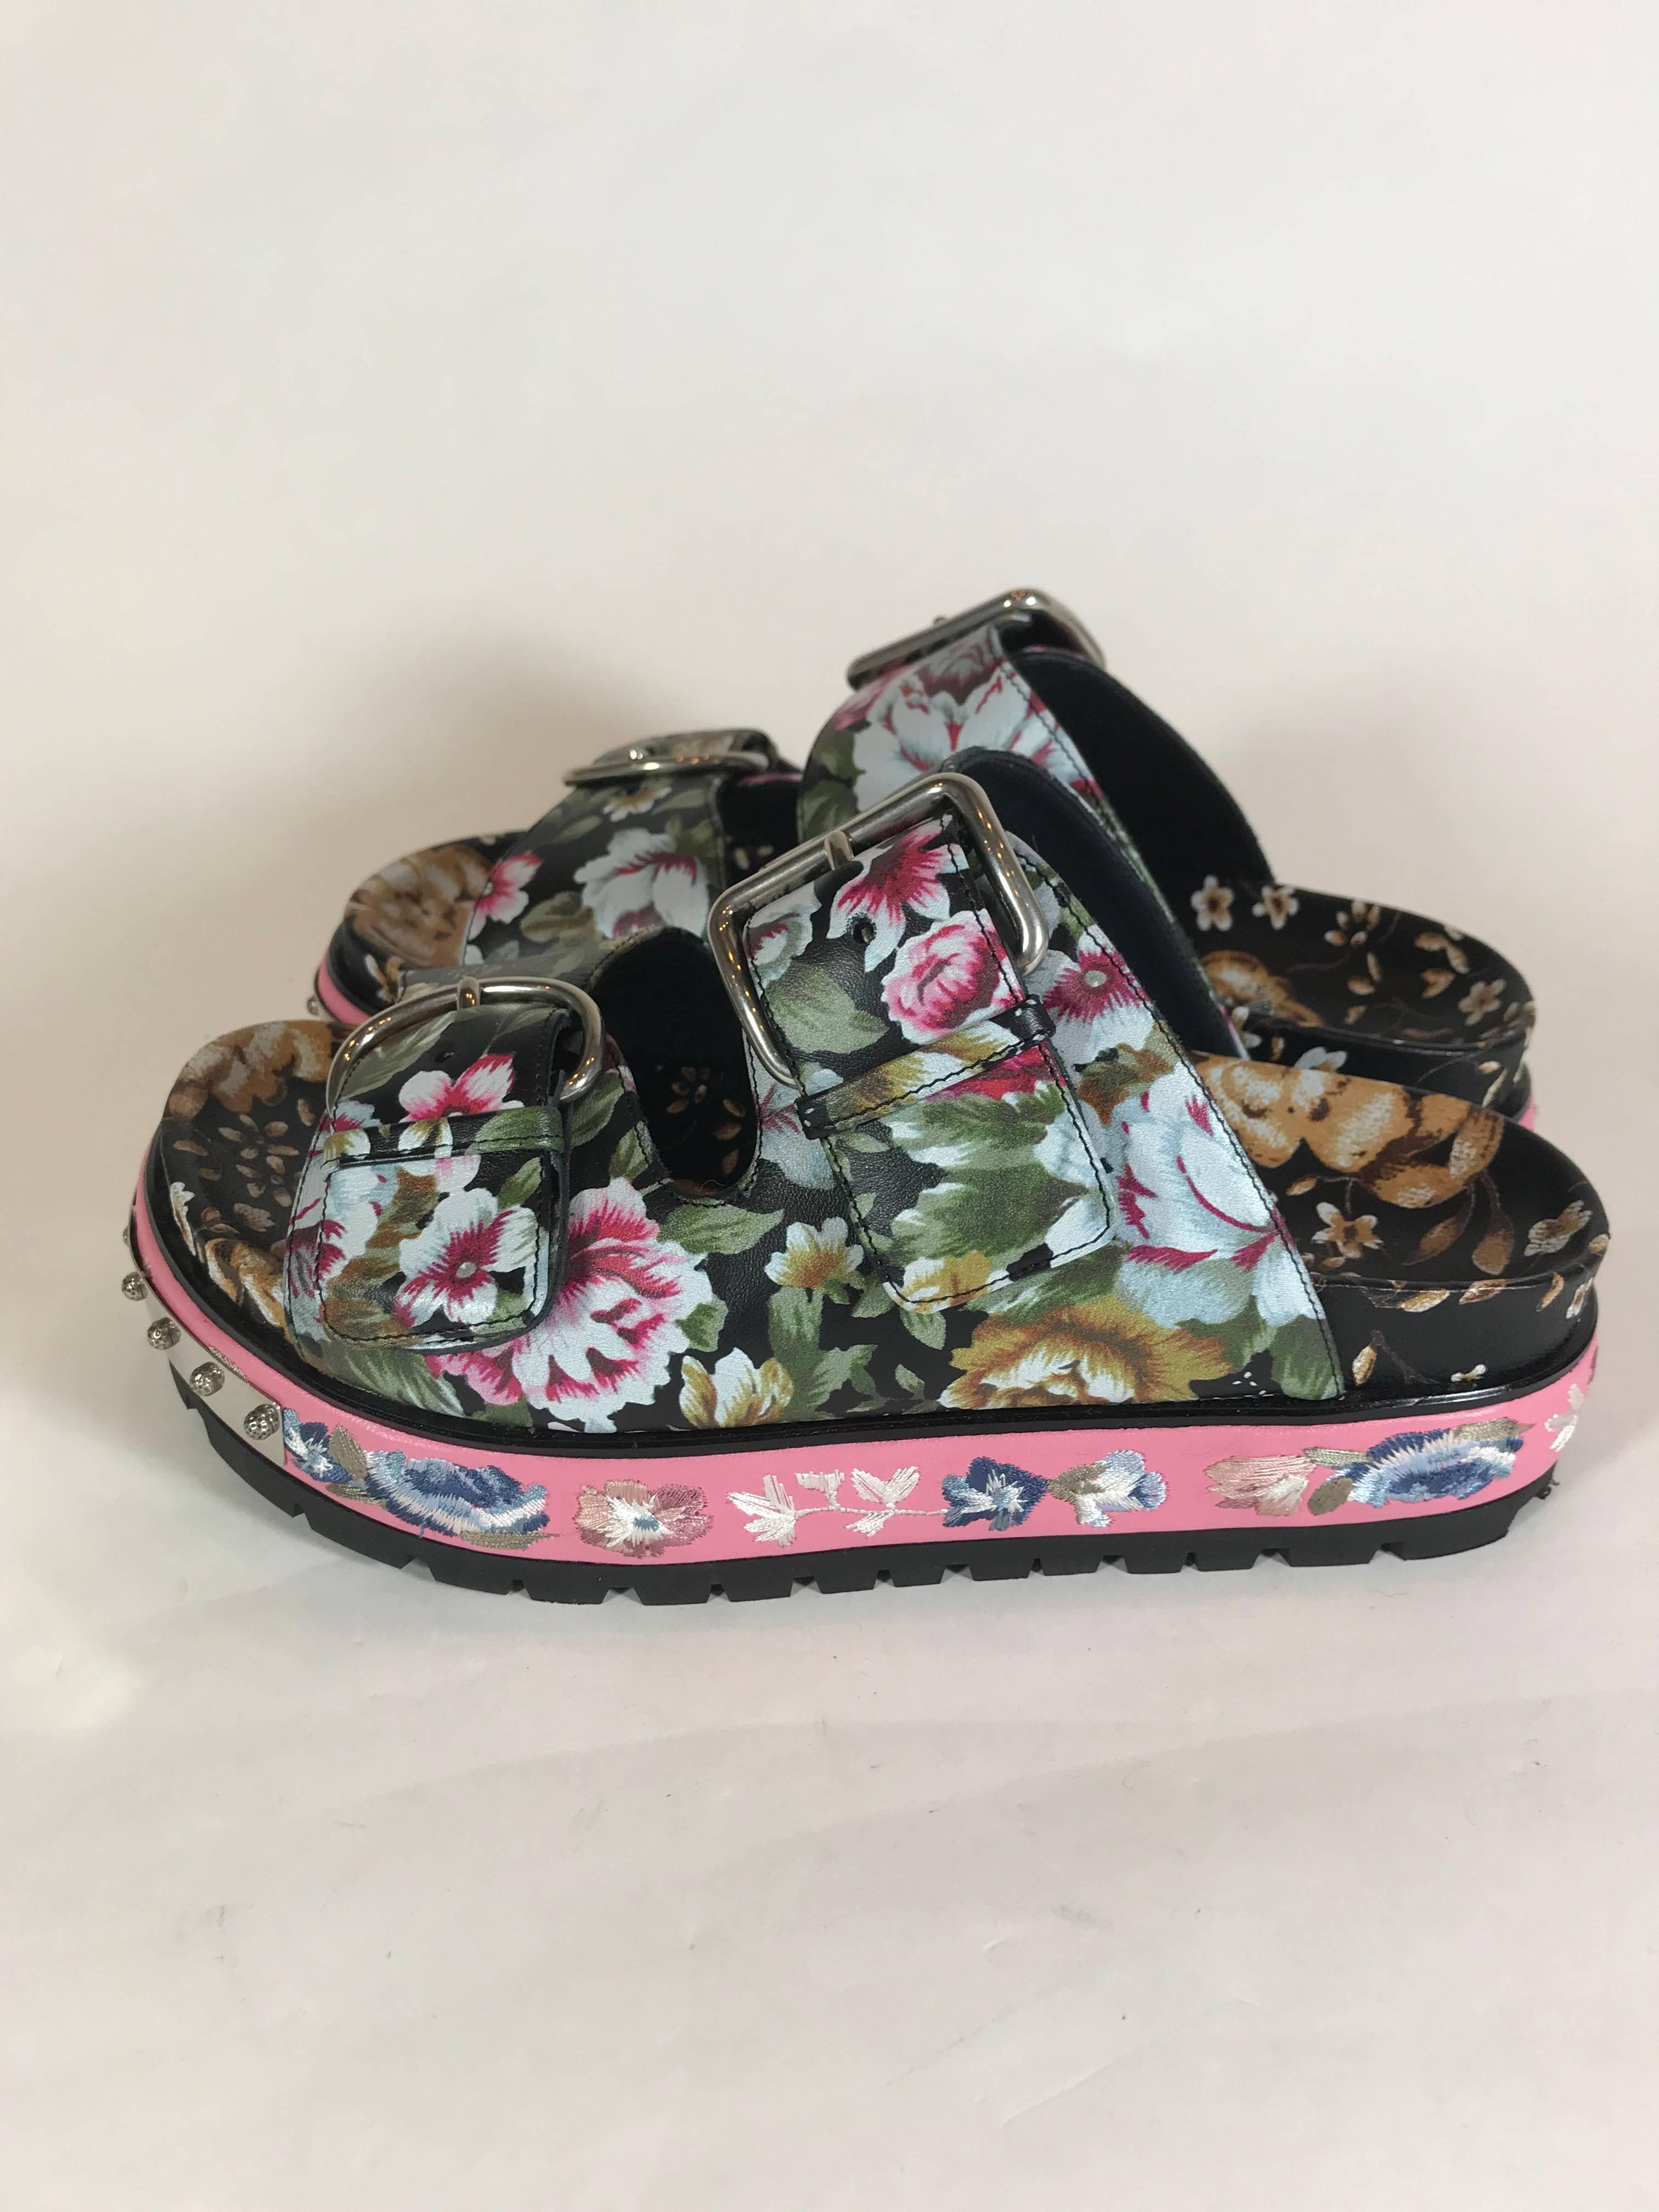 Alexander Mcqueen Floral Print Sandals In New Condition For Sale In Roslyn, NY